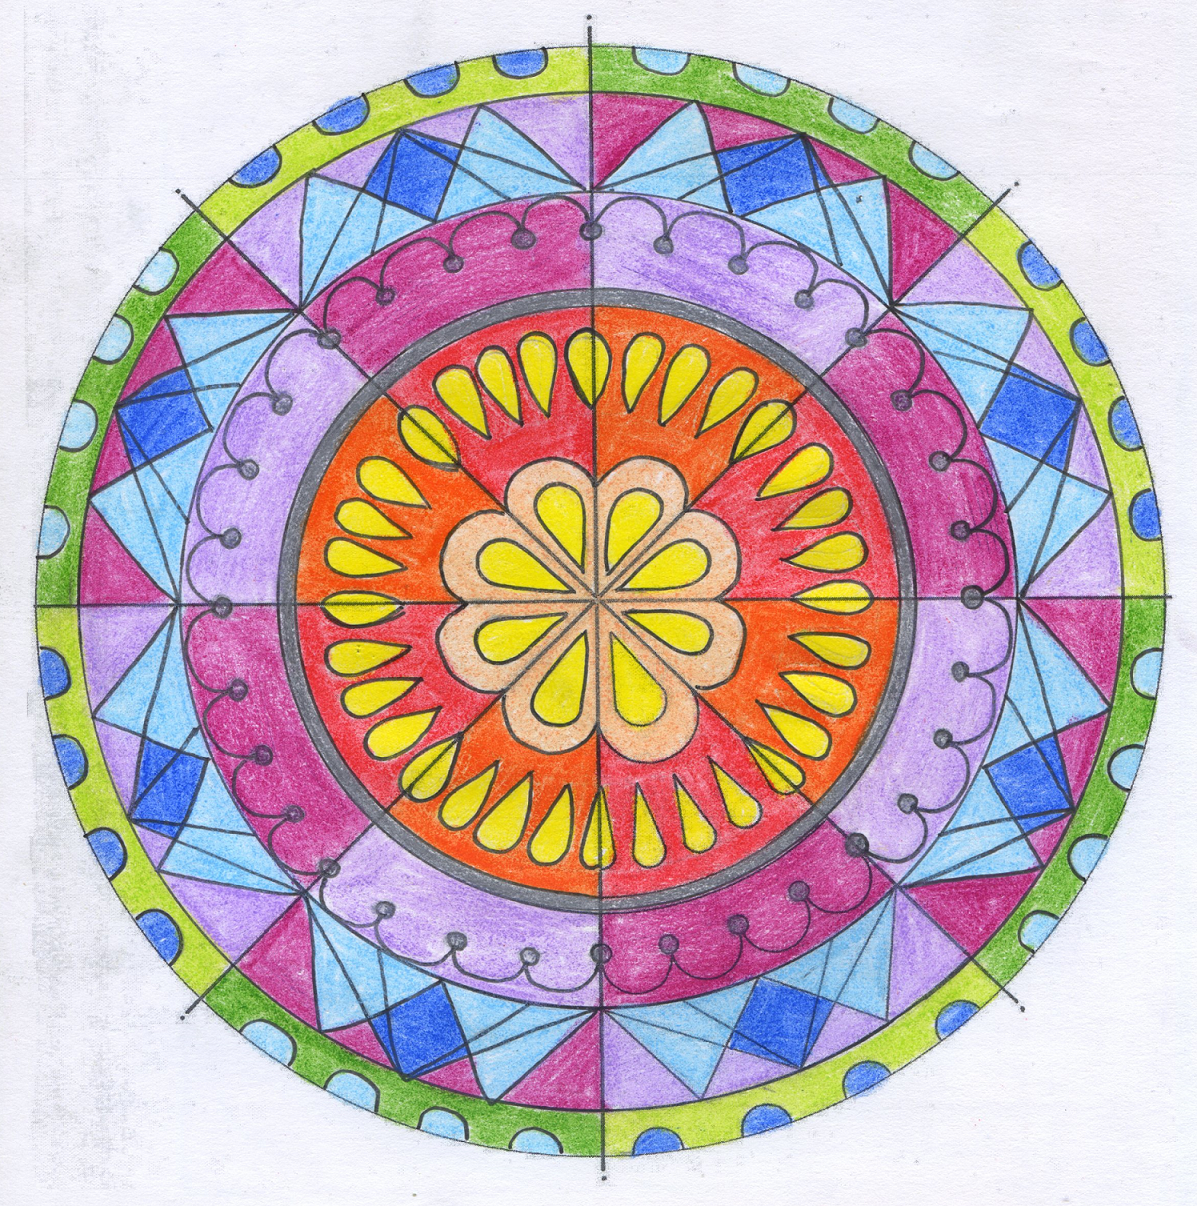 Visual Arts: Working with ... Radial symmetry